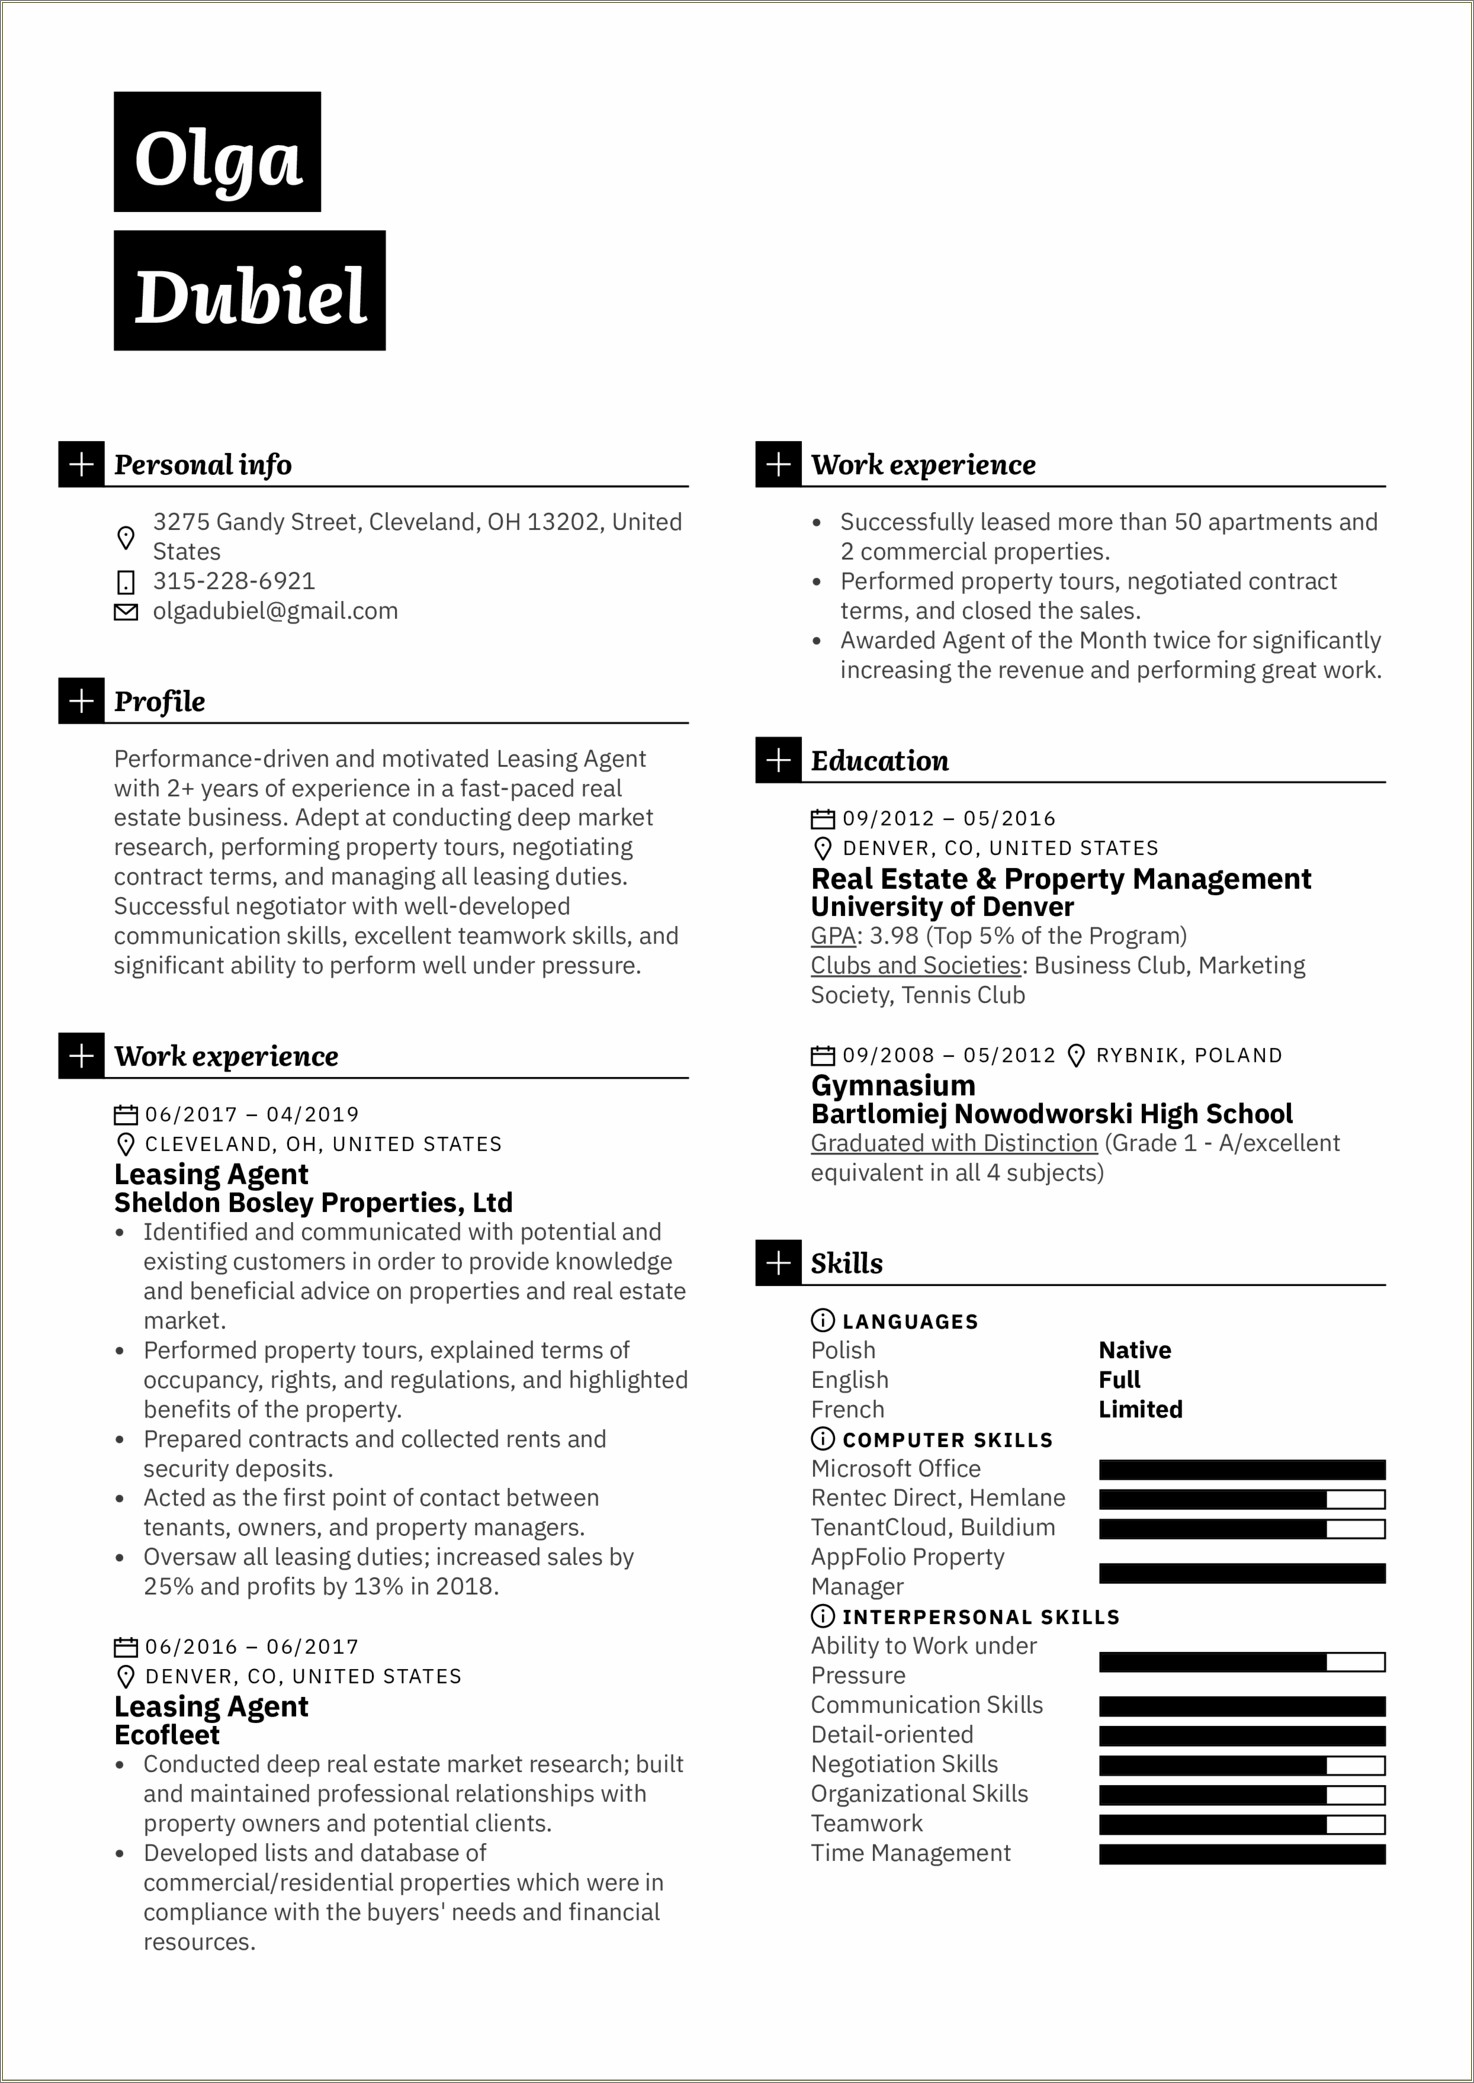 Resume Summary For Real Estate Agent